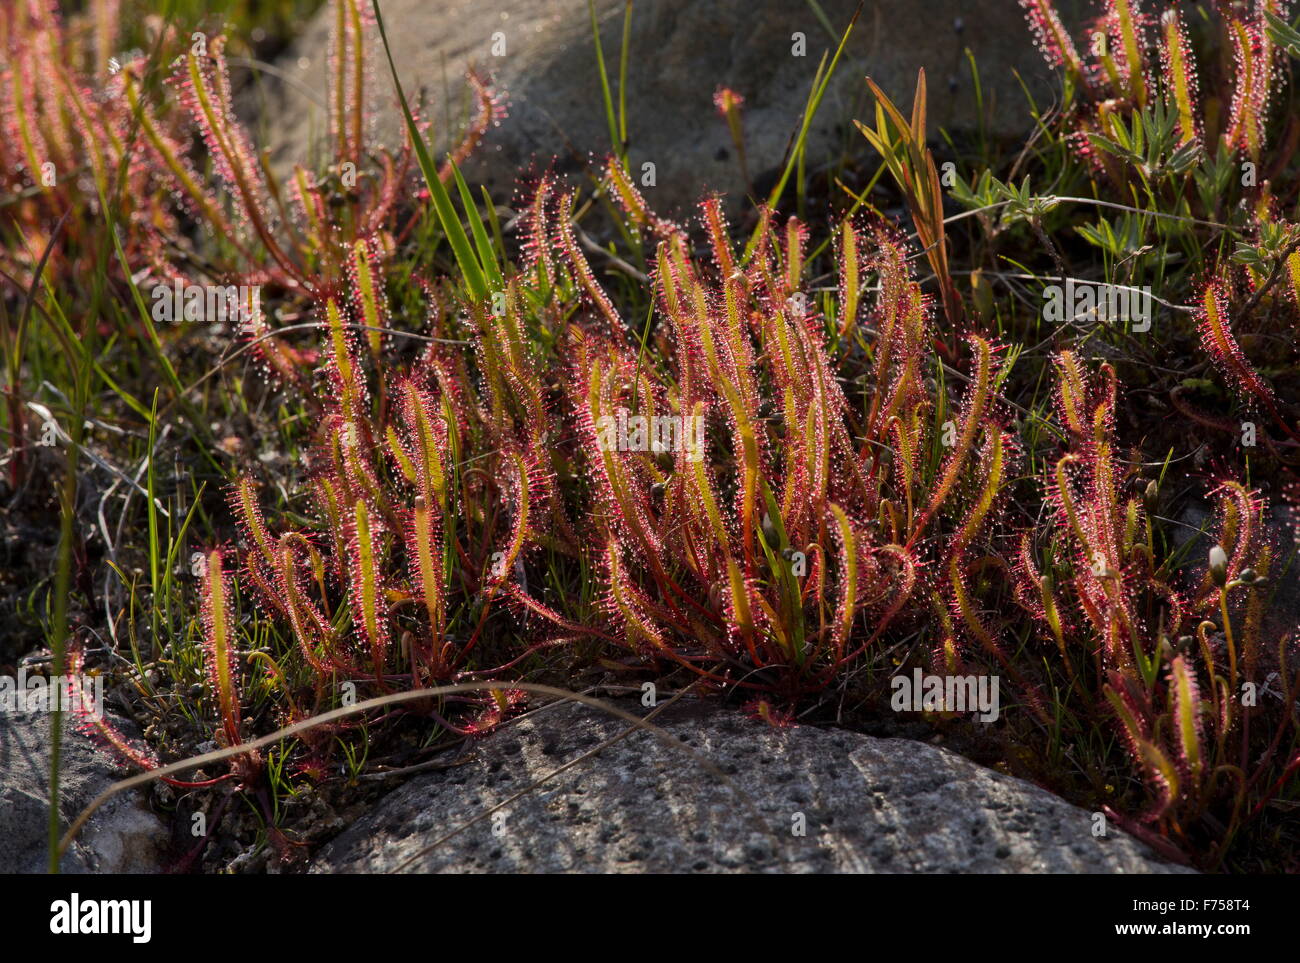 Linear-leaved Sundew - long-leaved insectivorous plant. Ontario. Stock Photo